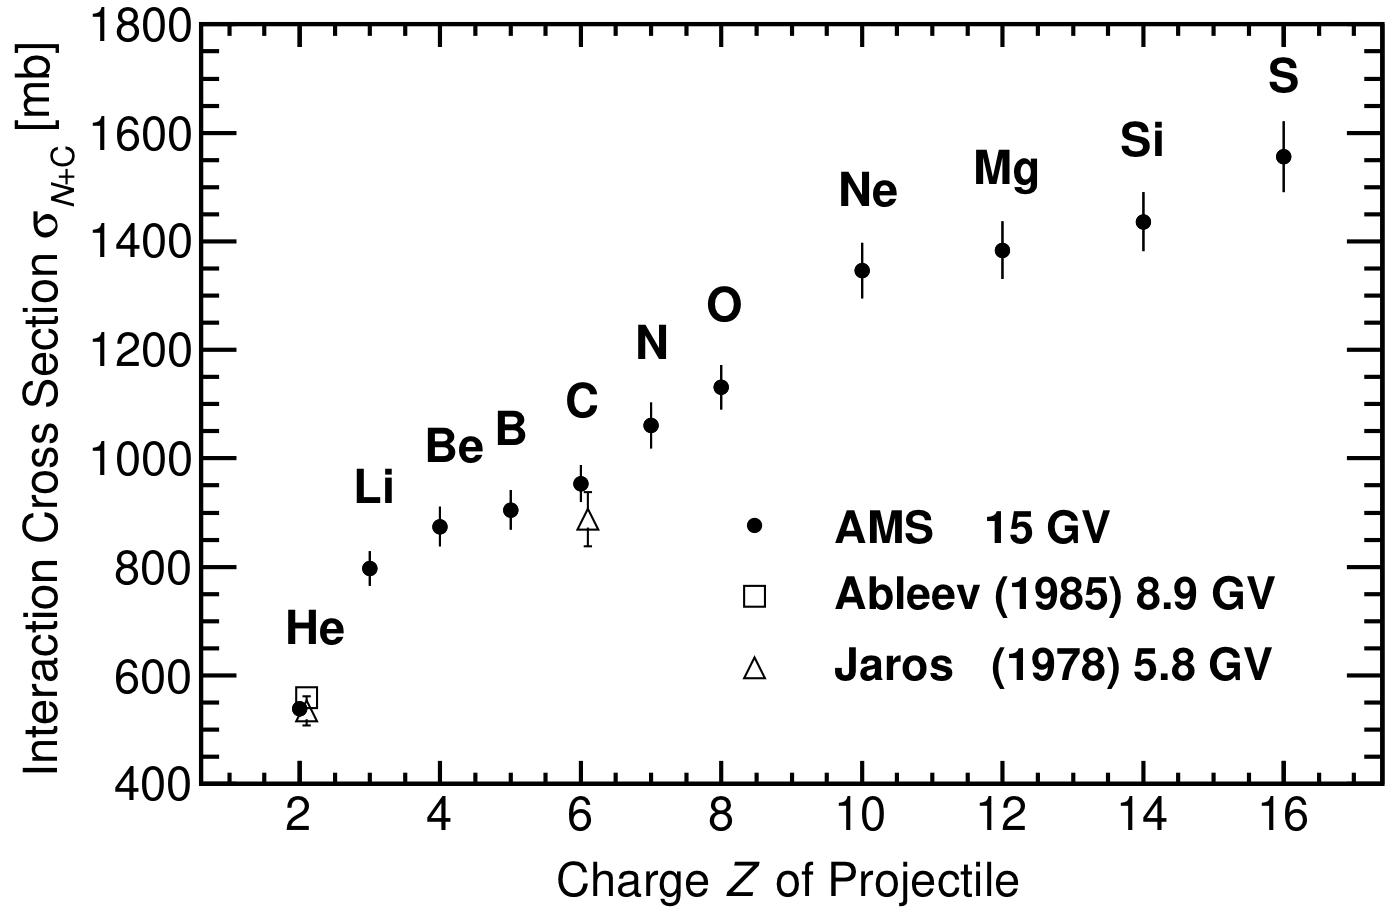 The AMS measured cross sections of He, Li, Be, B, C, N, O, and Si on Carbon averaged from 5 to 100 GV. 